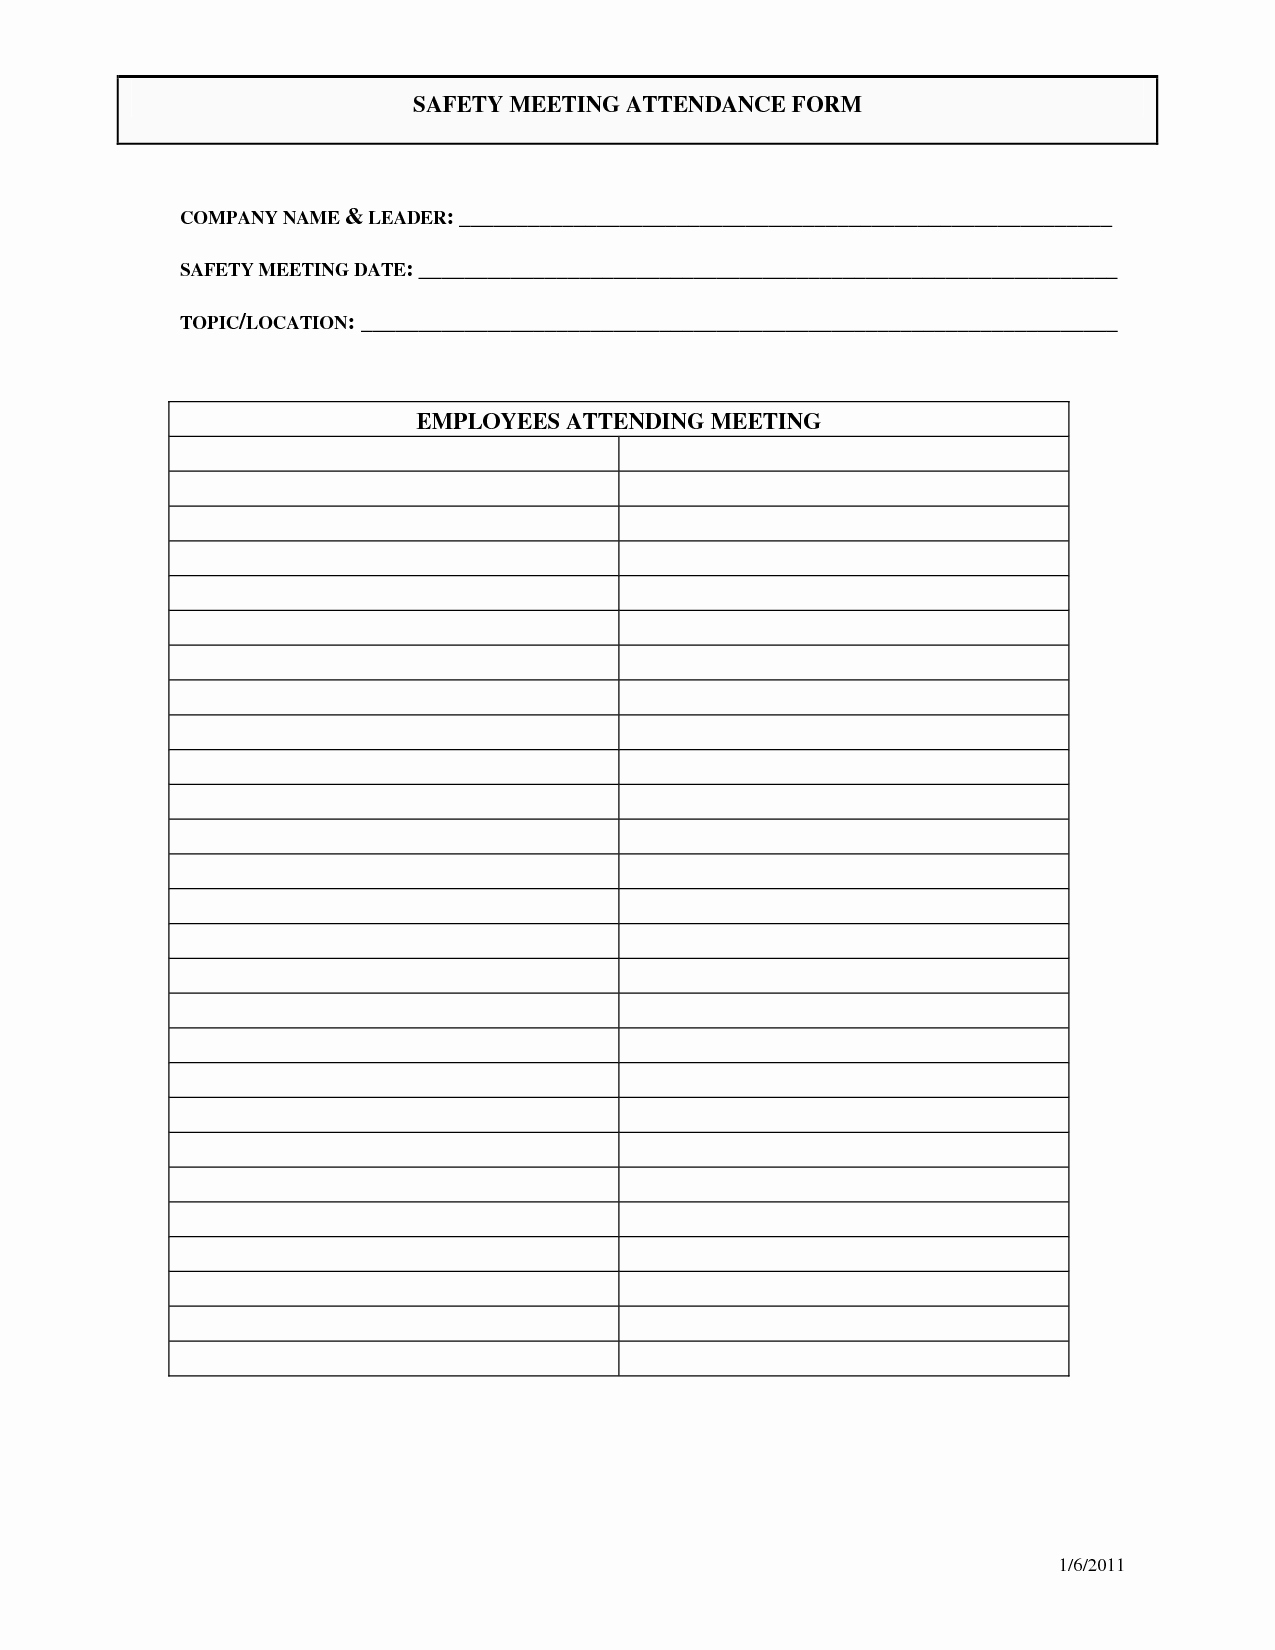 Training Sign Off Sheet Templates Lovely Osha Training Sign In Sheet Google Search Kd Kreations